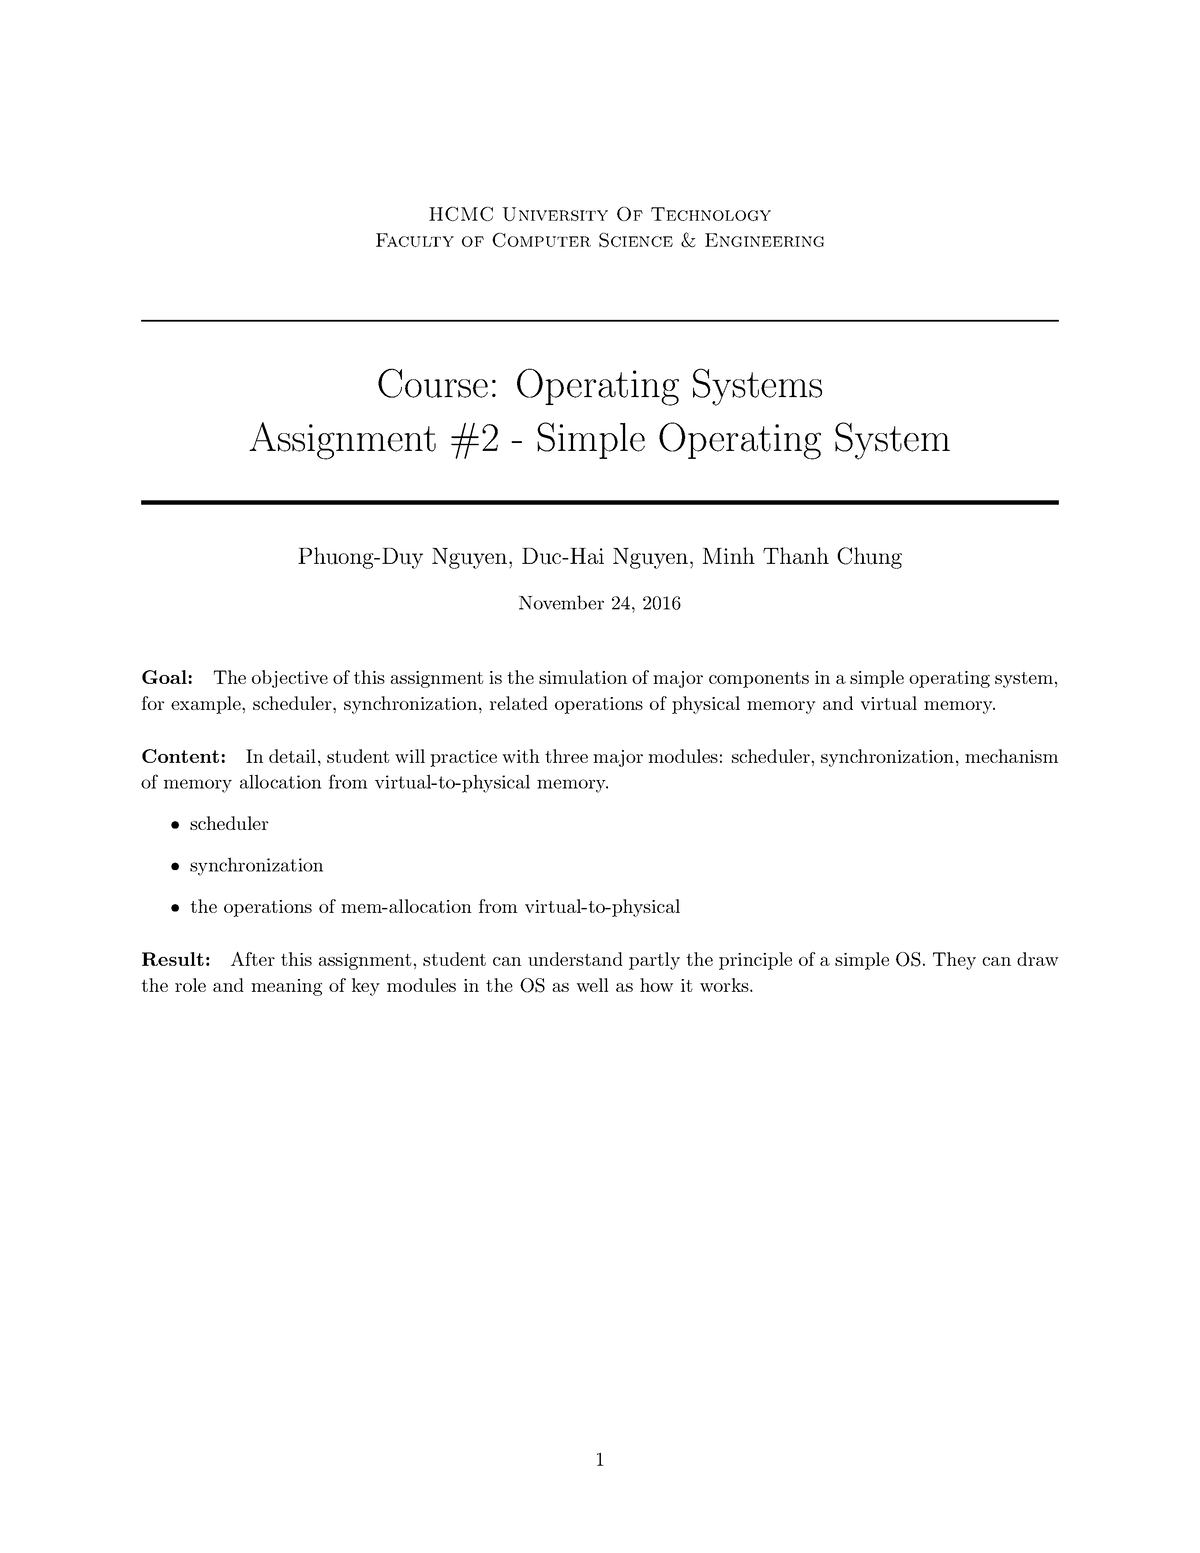 advanced operating system research paper